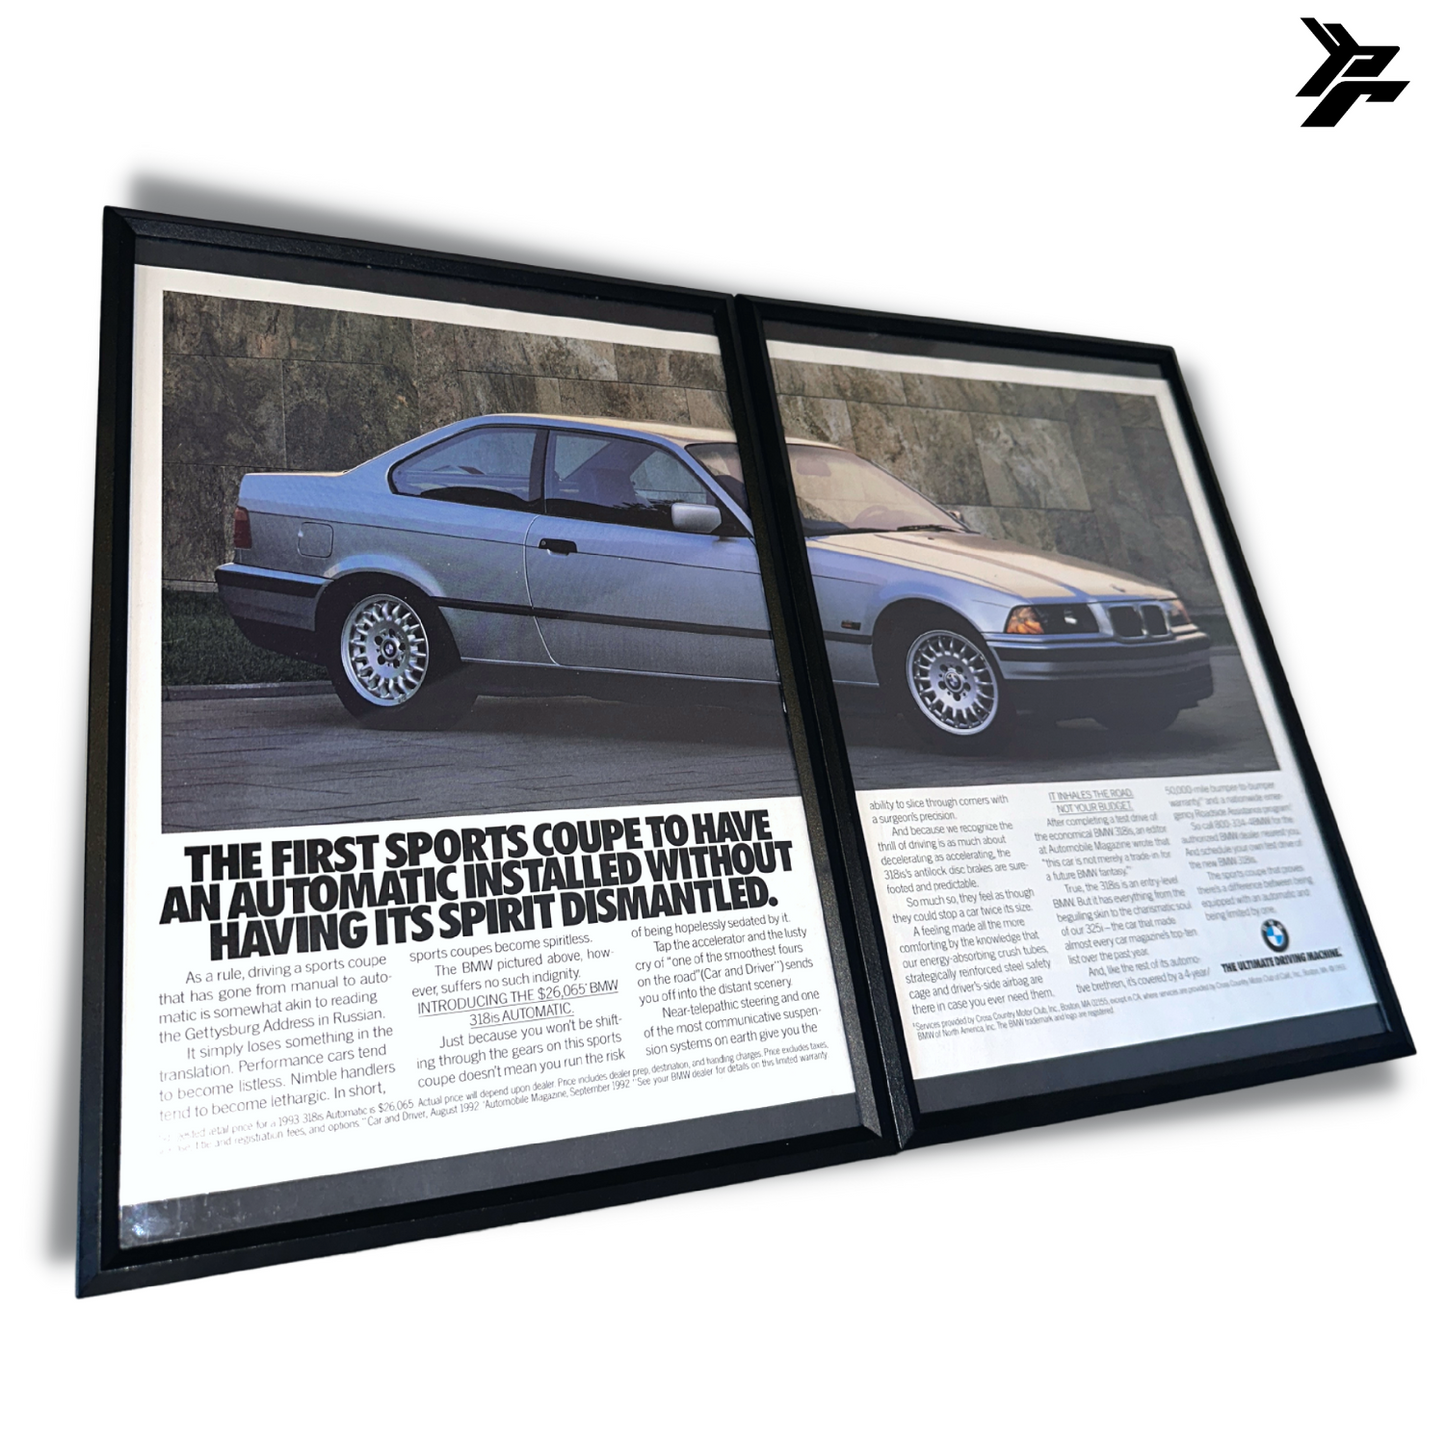 Bmw 318 first sports coupe framed ad